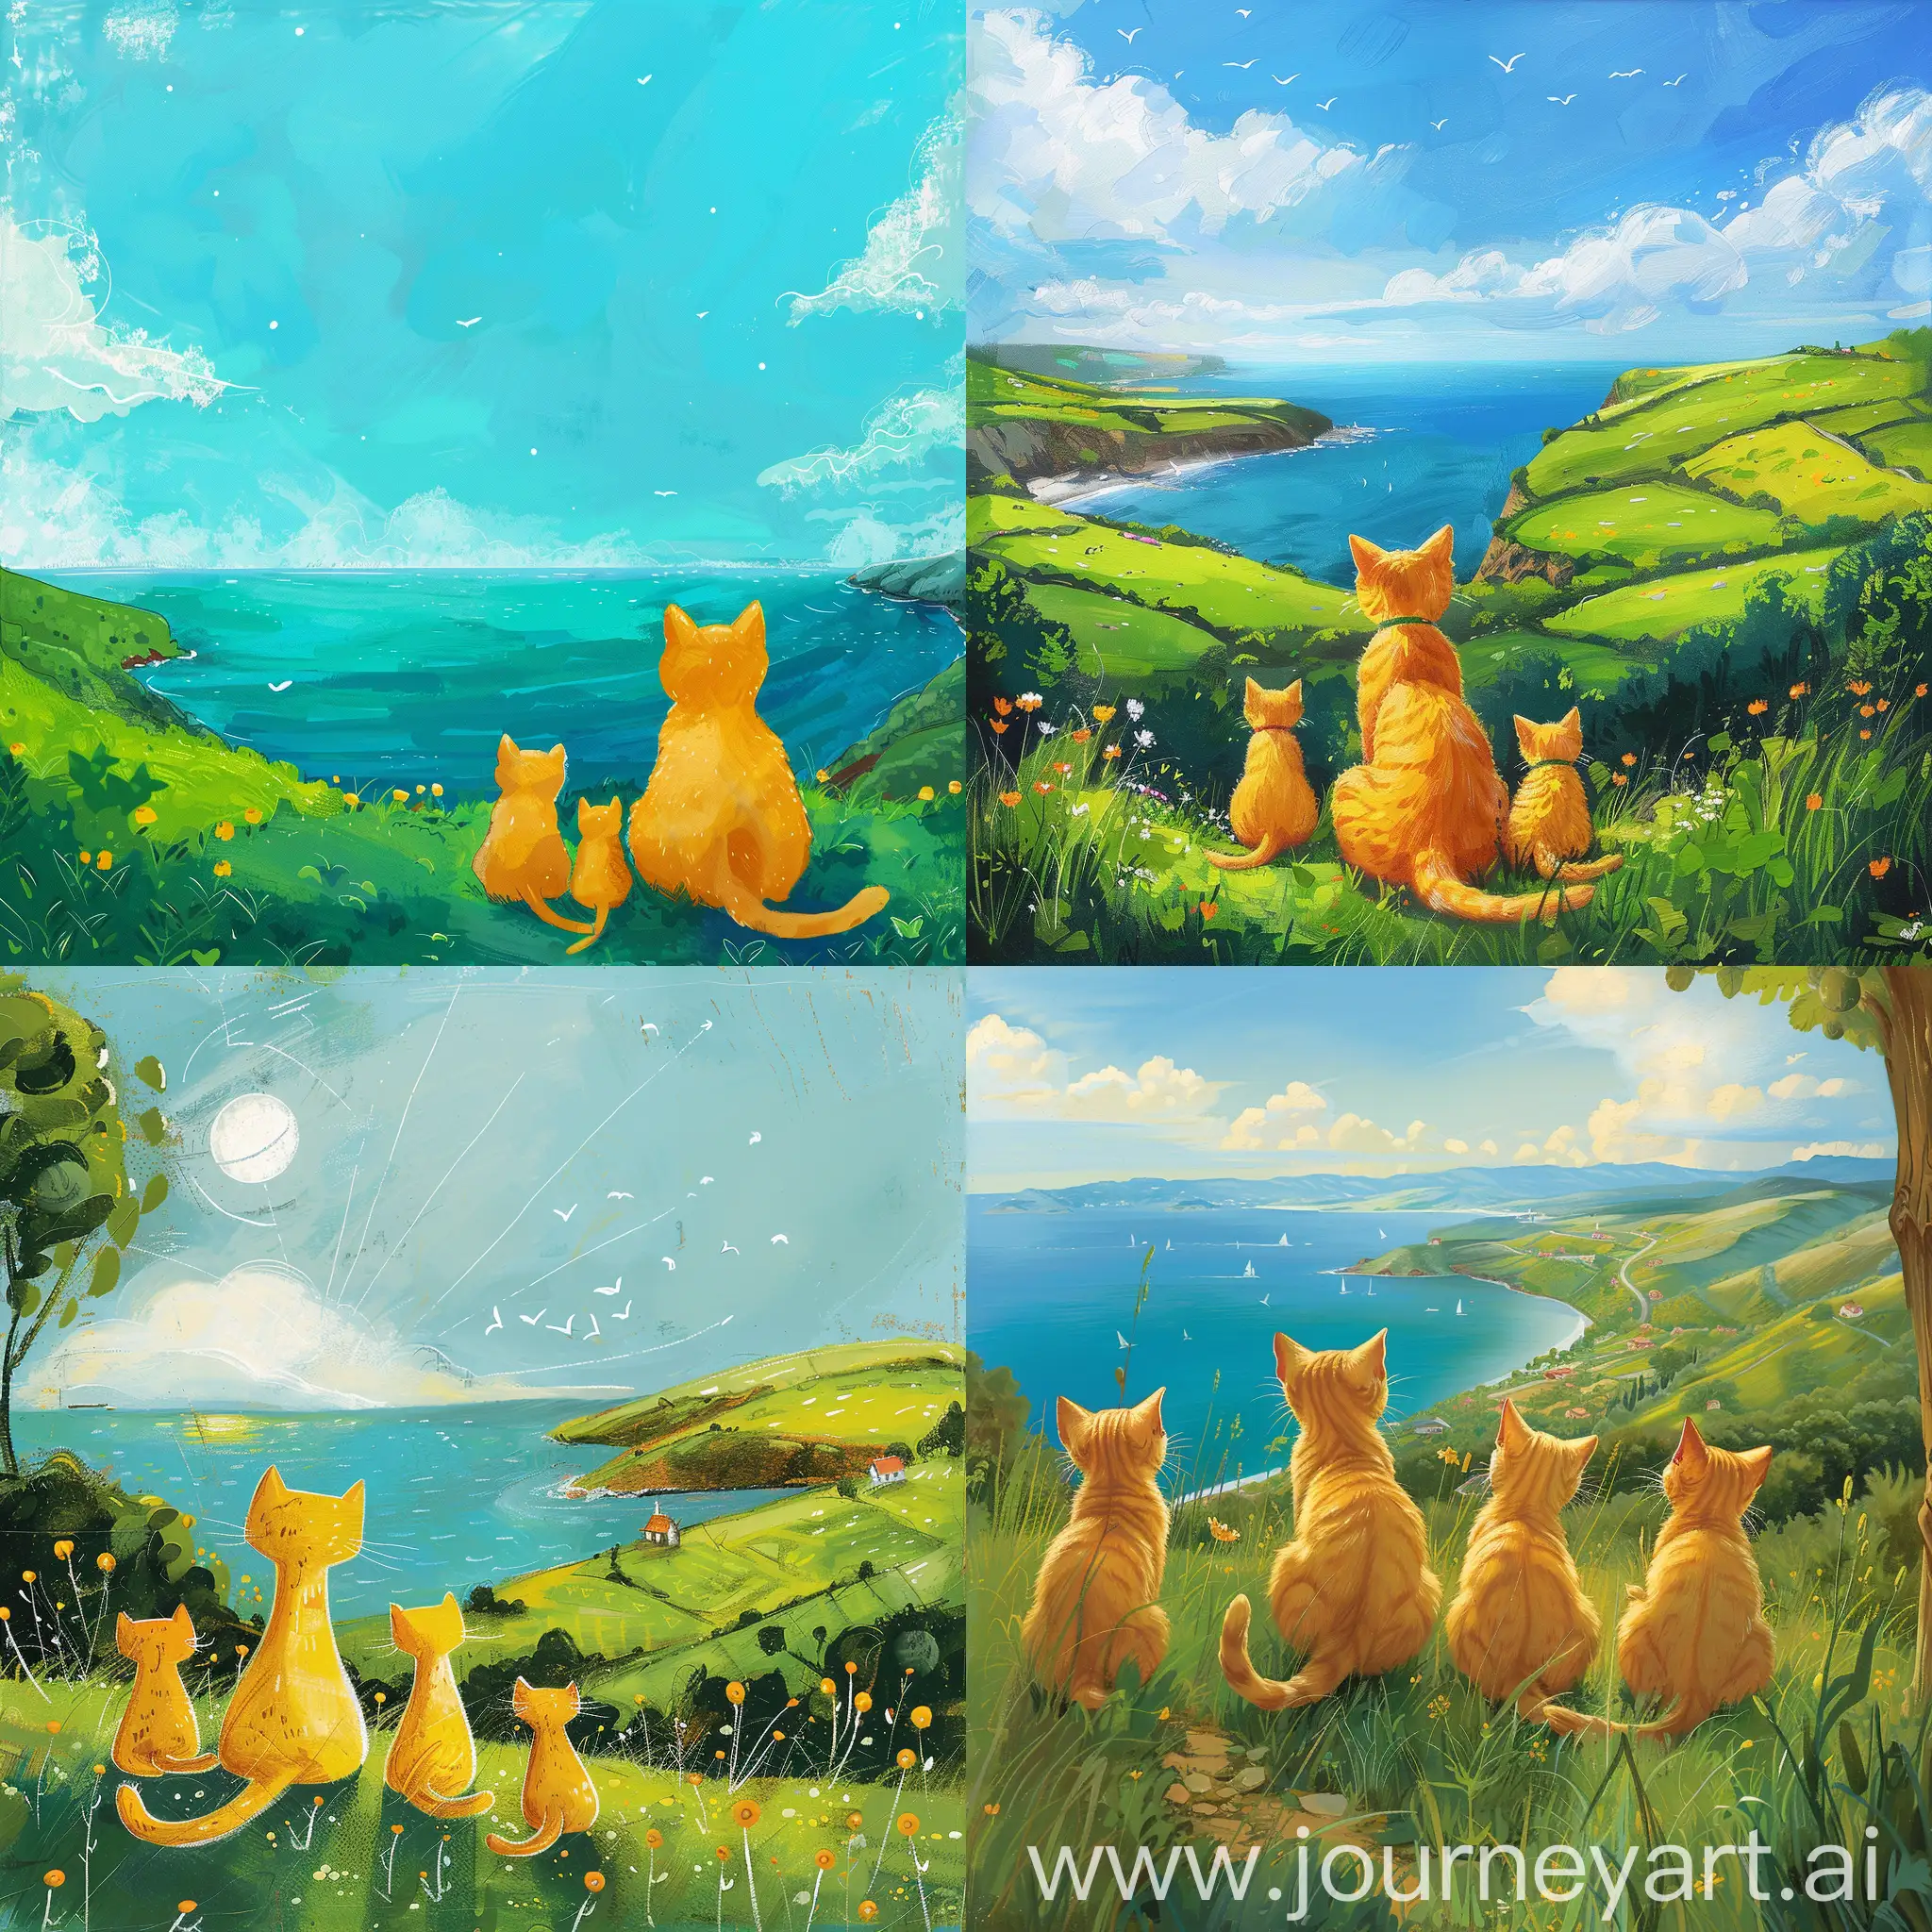 A real picture. A yellow cat with her sisters. In a green land. Looking at the sea.